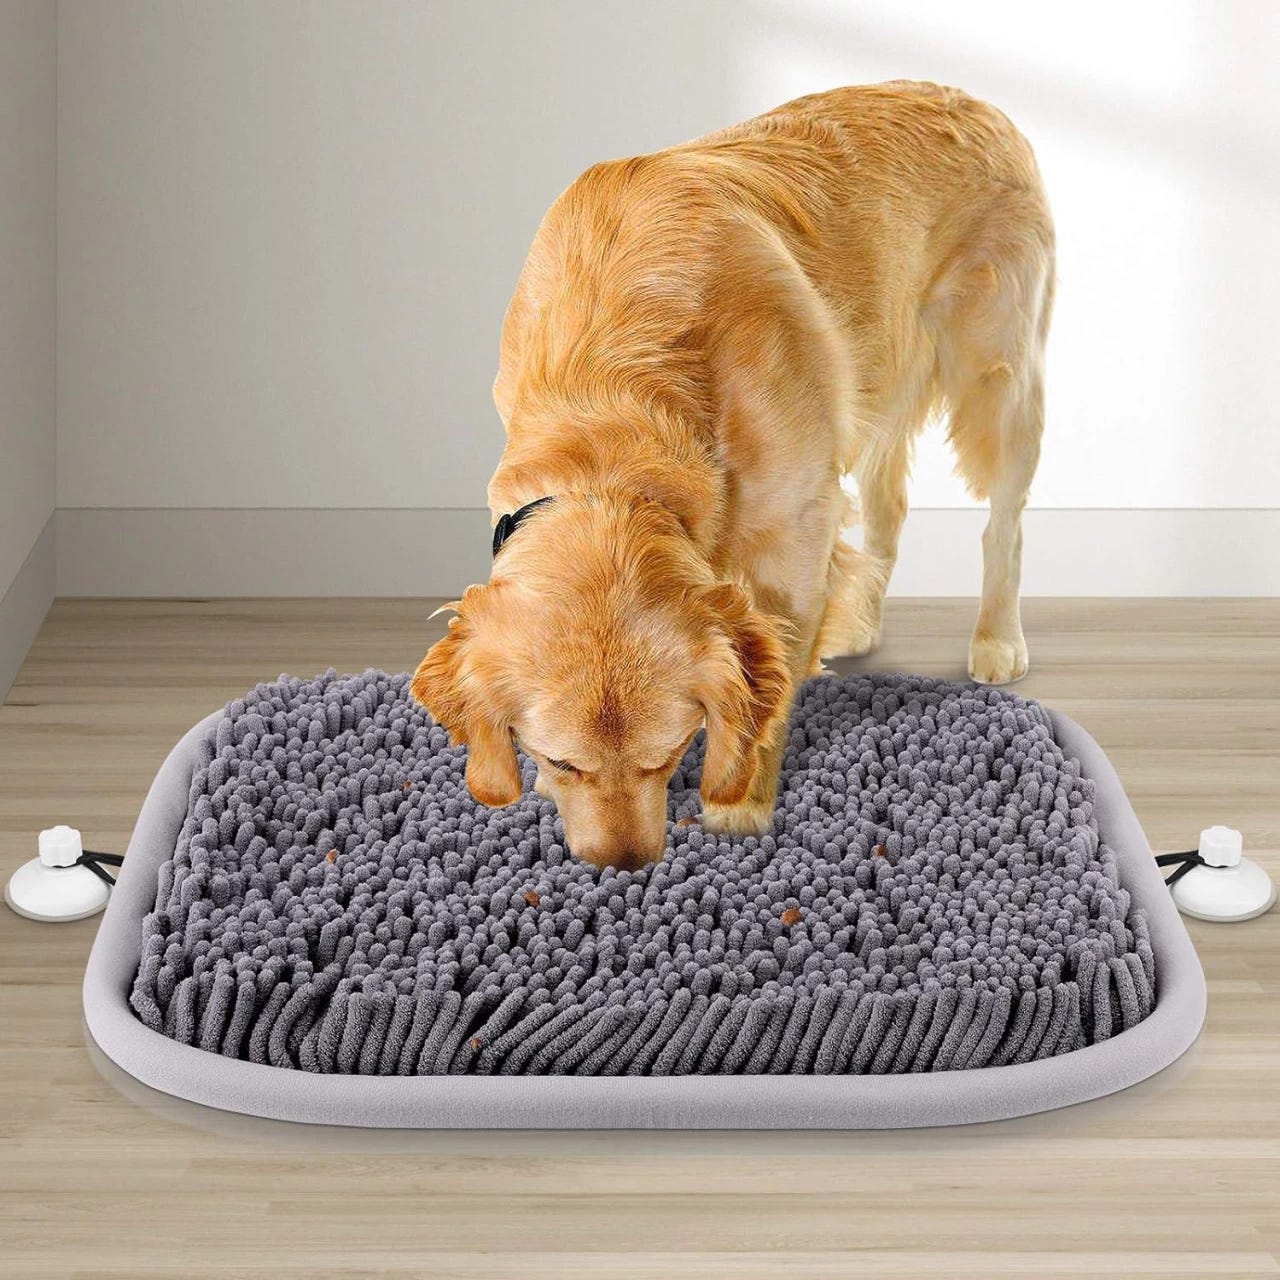 MateeyLife Licking Mat for Dogs and Cats, Premium Lick Mats with